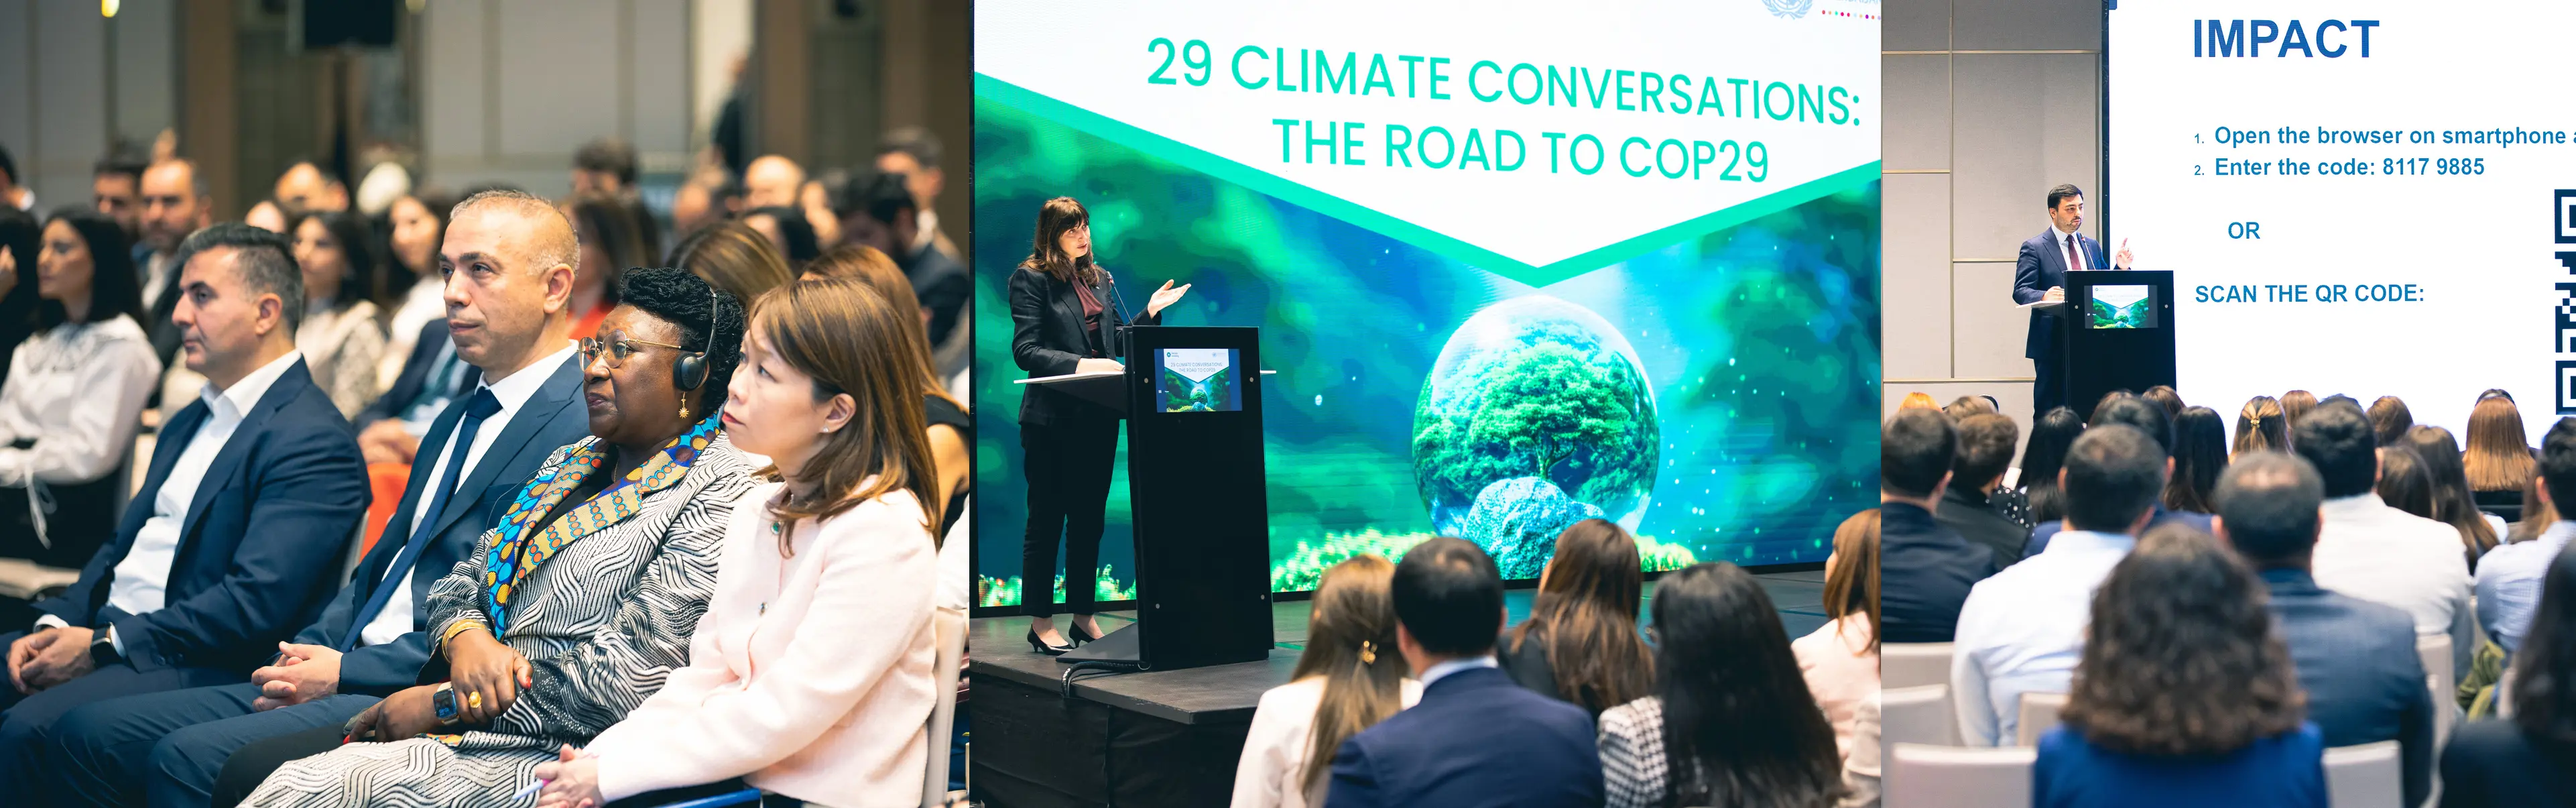 29 Climate Conversations - The Road to COP29